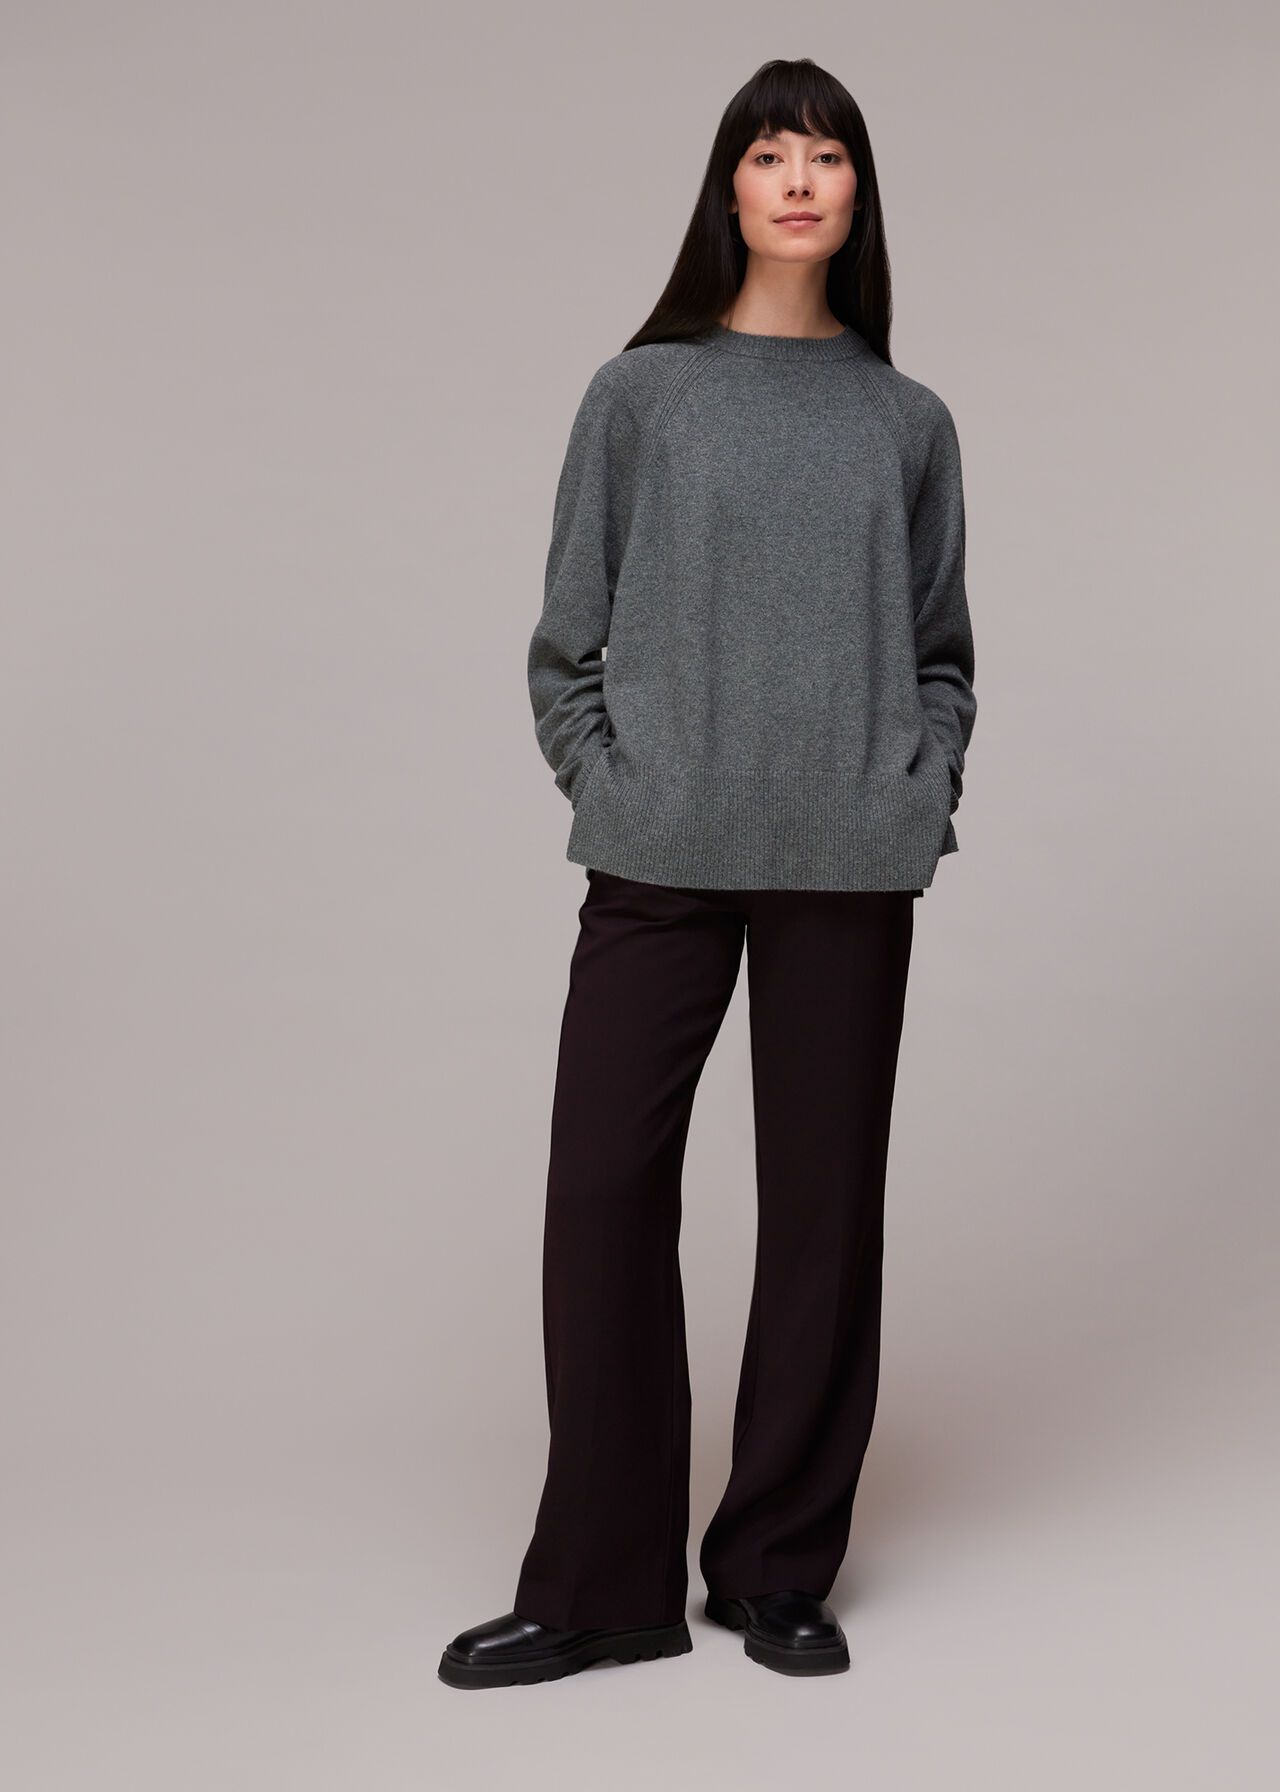 Shop the Dark Grey Cashmere Crew Neck Jumper at Whistles | | Whistles